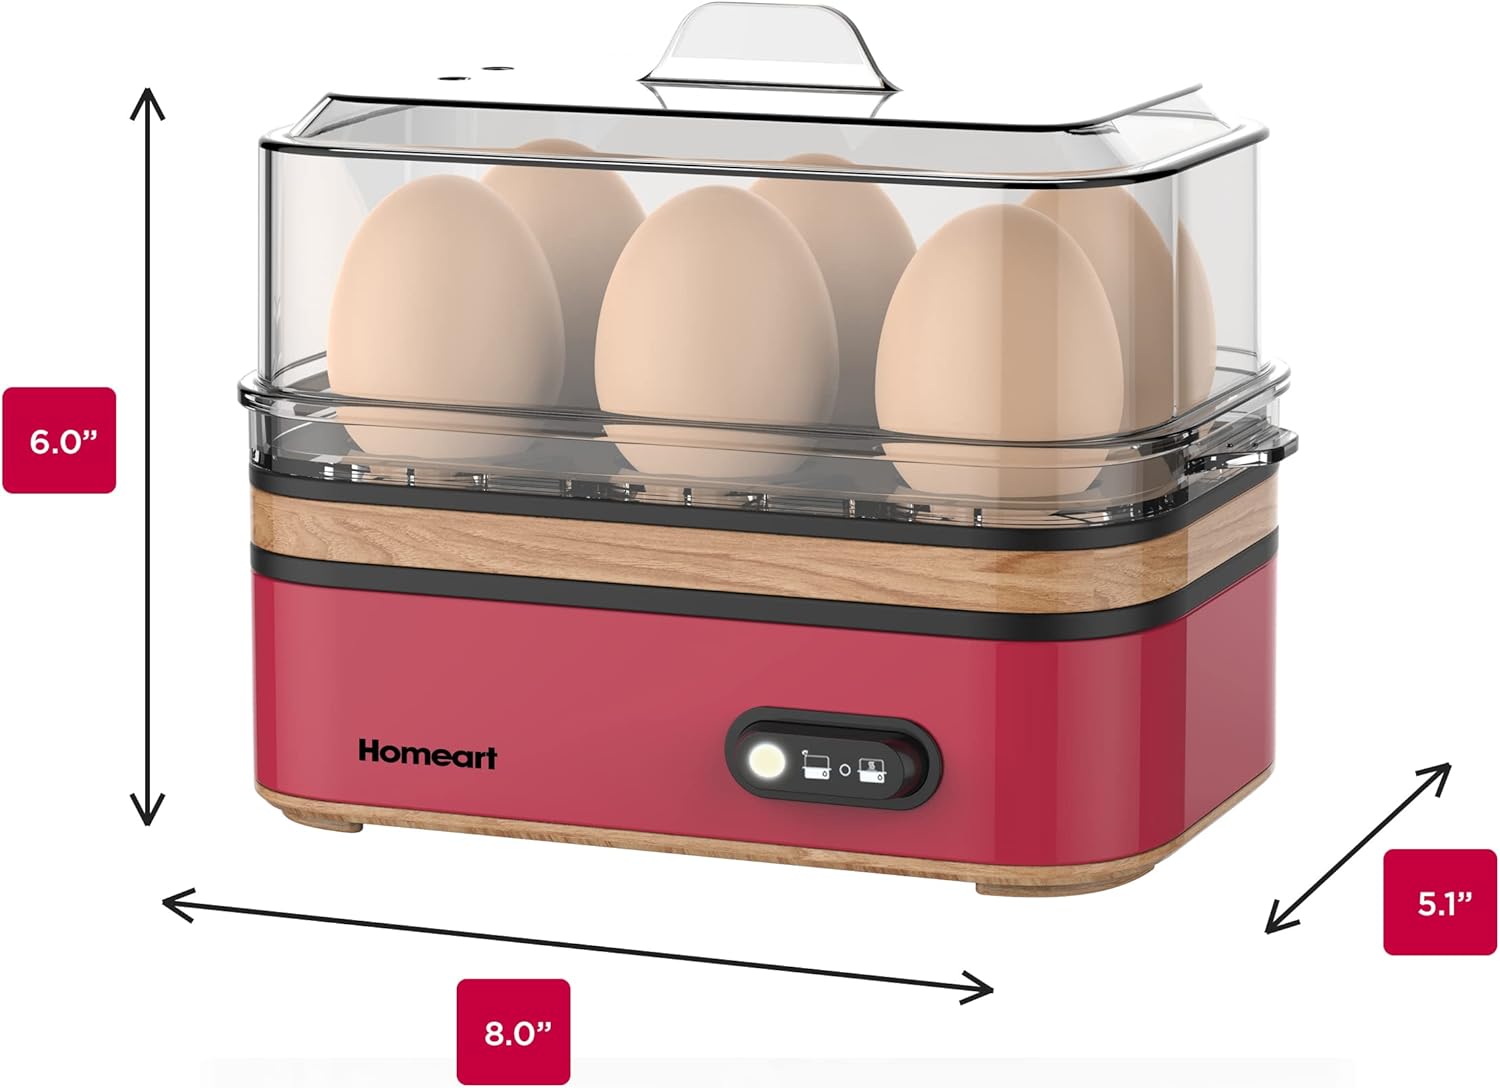 Homeart Panda Egg Boiler with Wooden Detail- Rapid Electric Hard Boiled Egg Cooker with Auto Shut-Off, Alarm and Egg Piercer, 6 Egg Capacity, Red, 400W